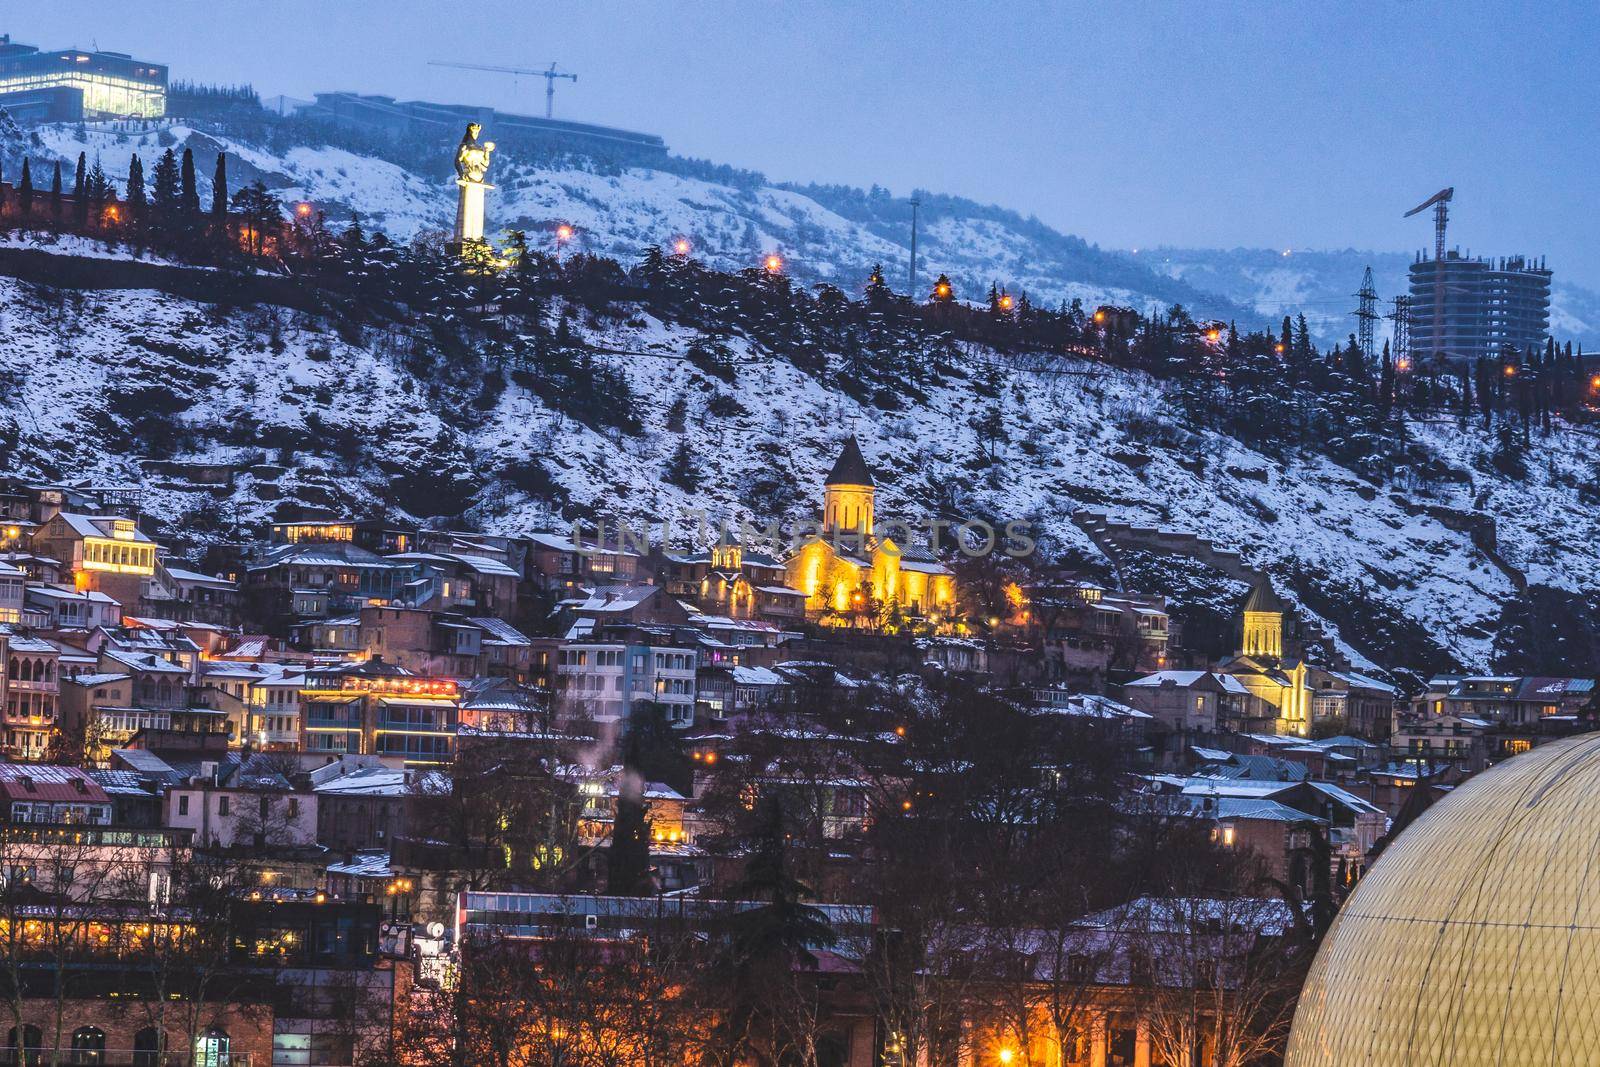 Snowing in Tbilisi city in the evening by Elet